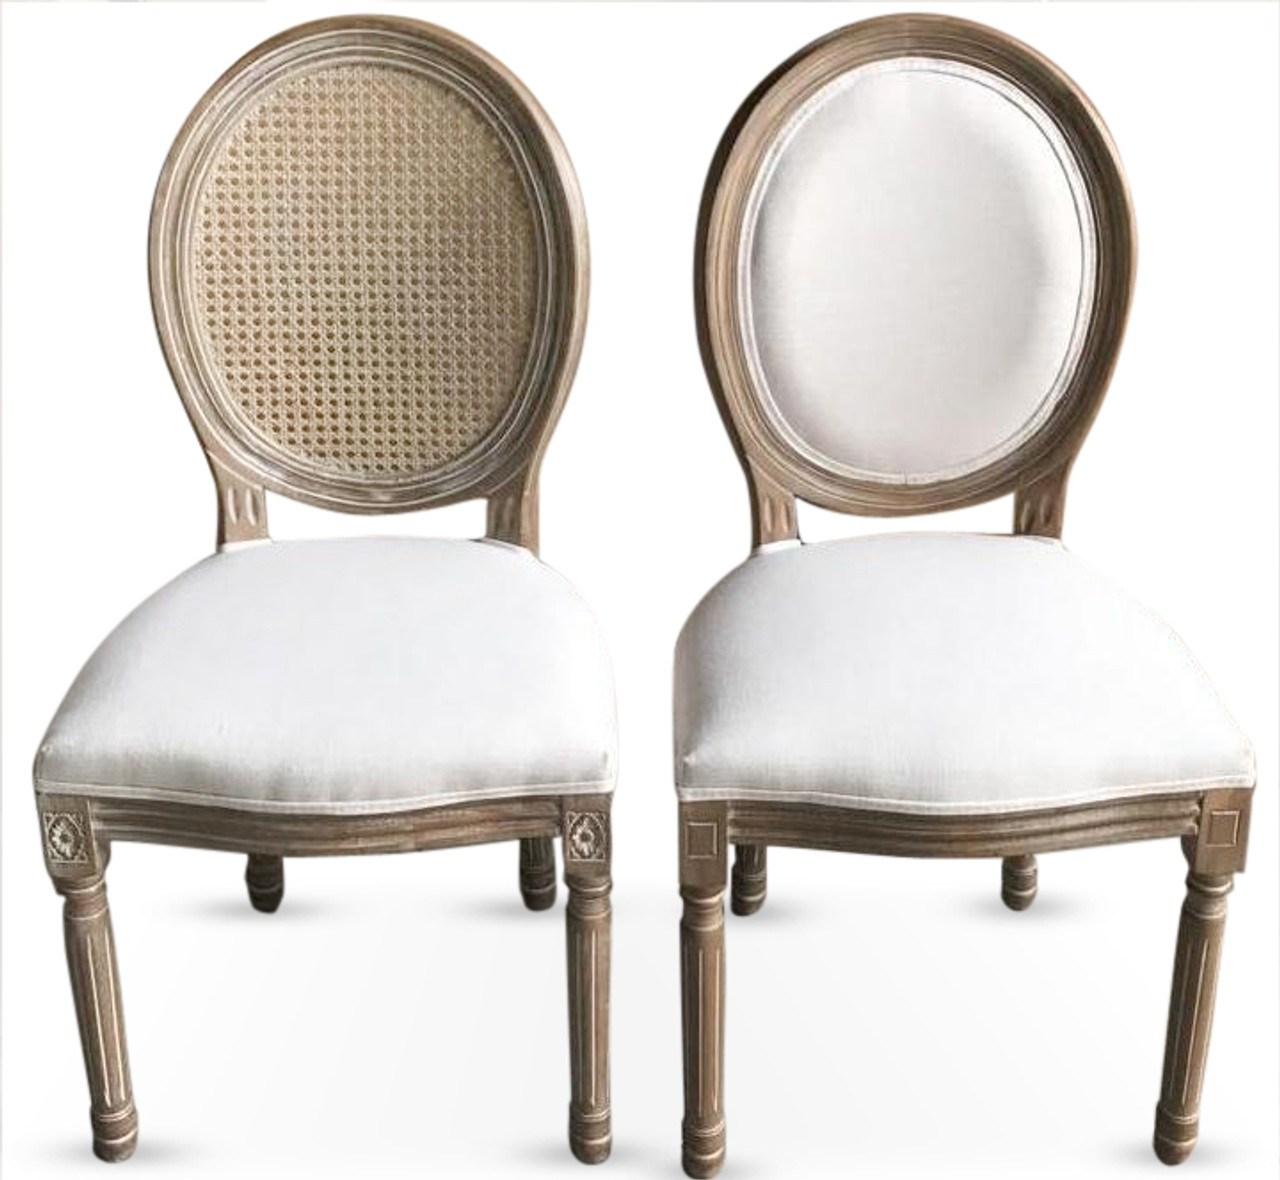 King Louis Chair - Natural with Rattan Back 